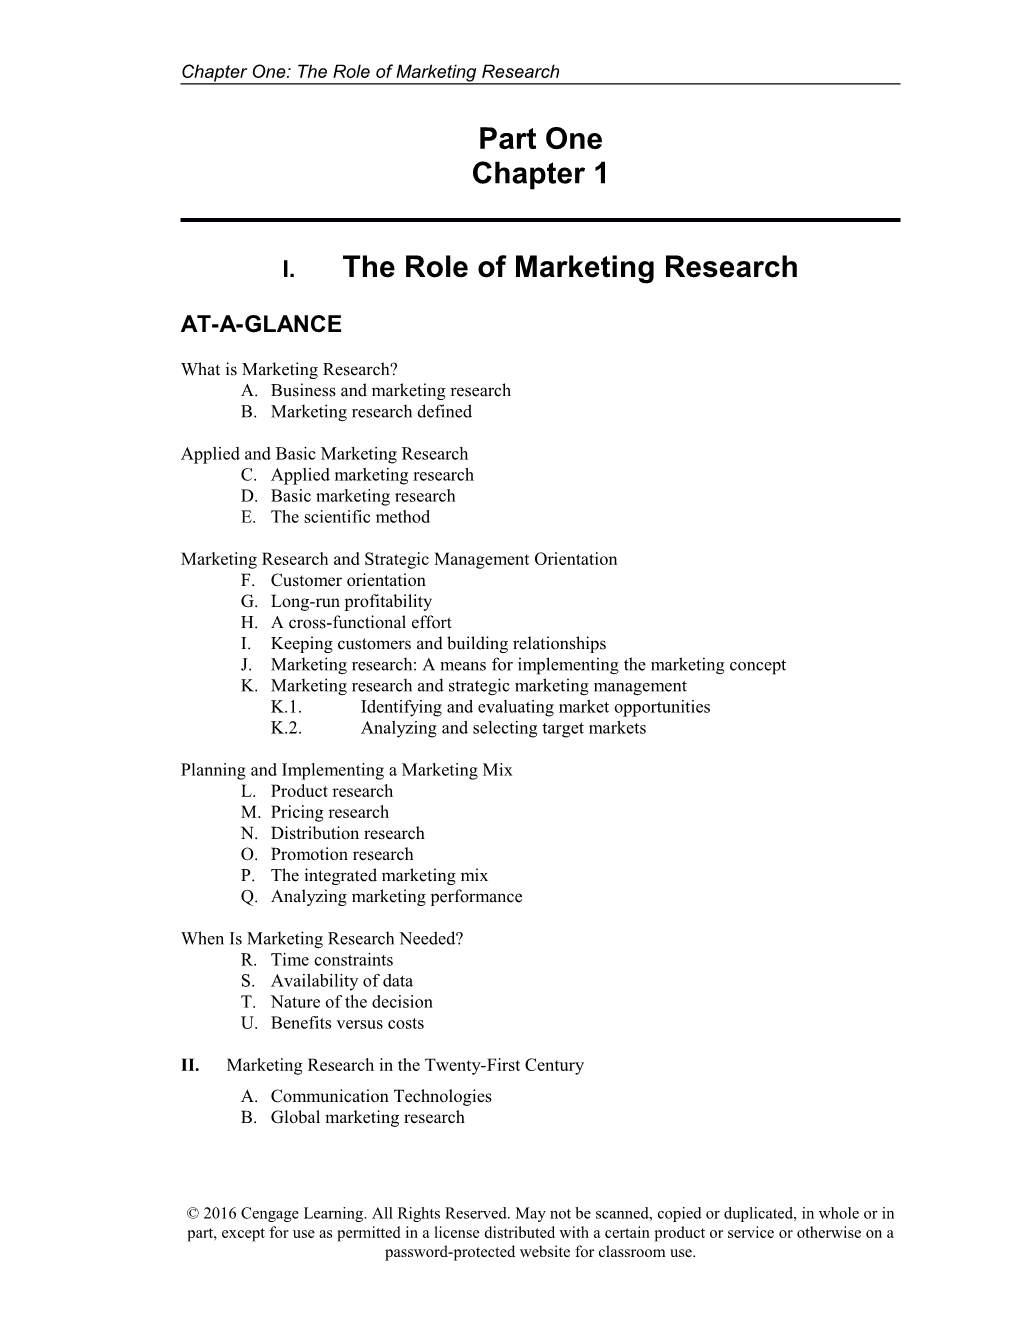 Chapter One: the Role of Marketing Research